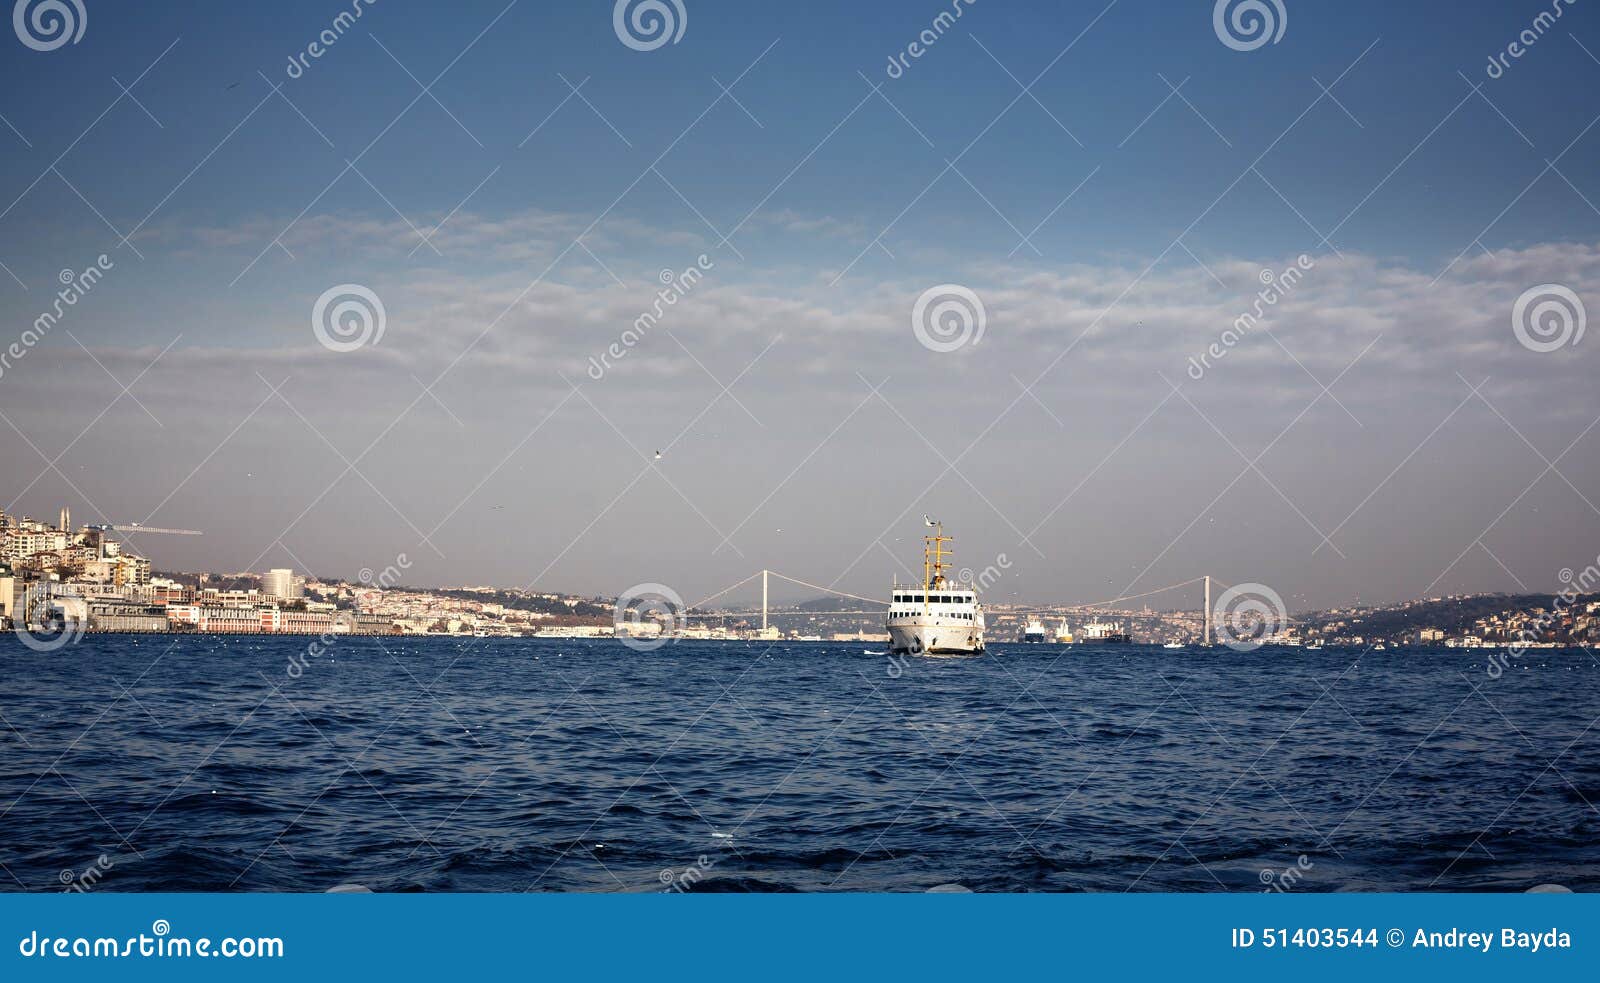 floating ship and instanbul city